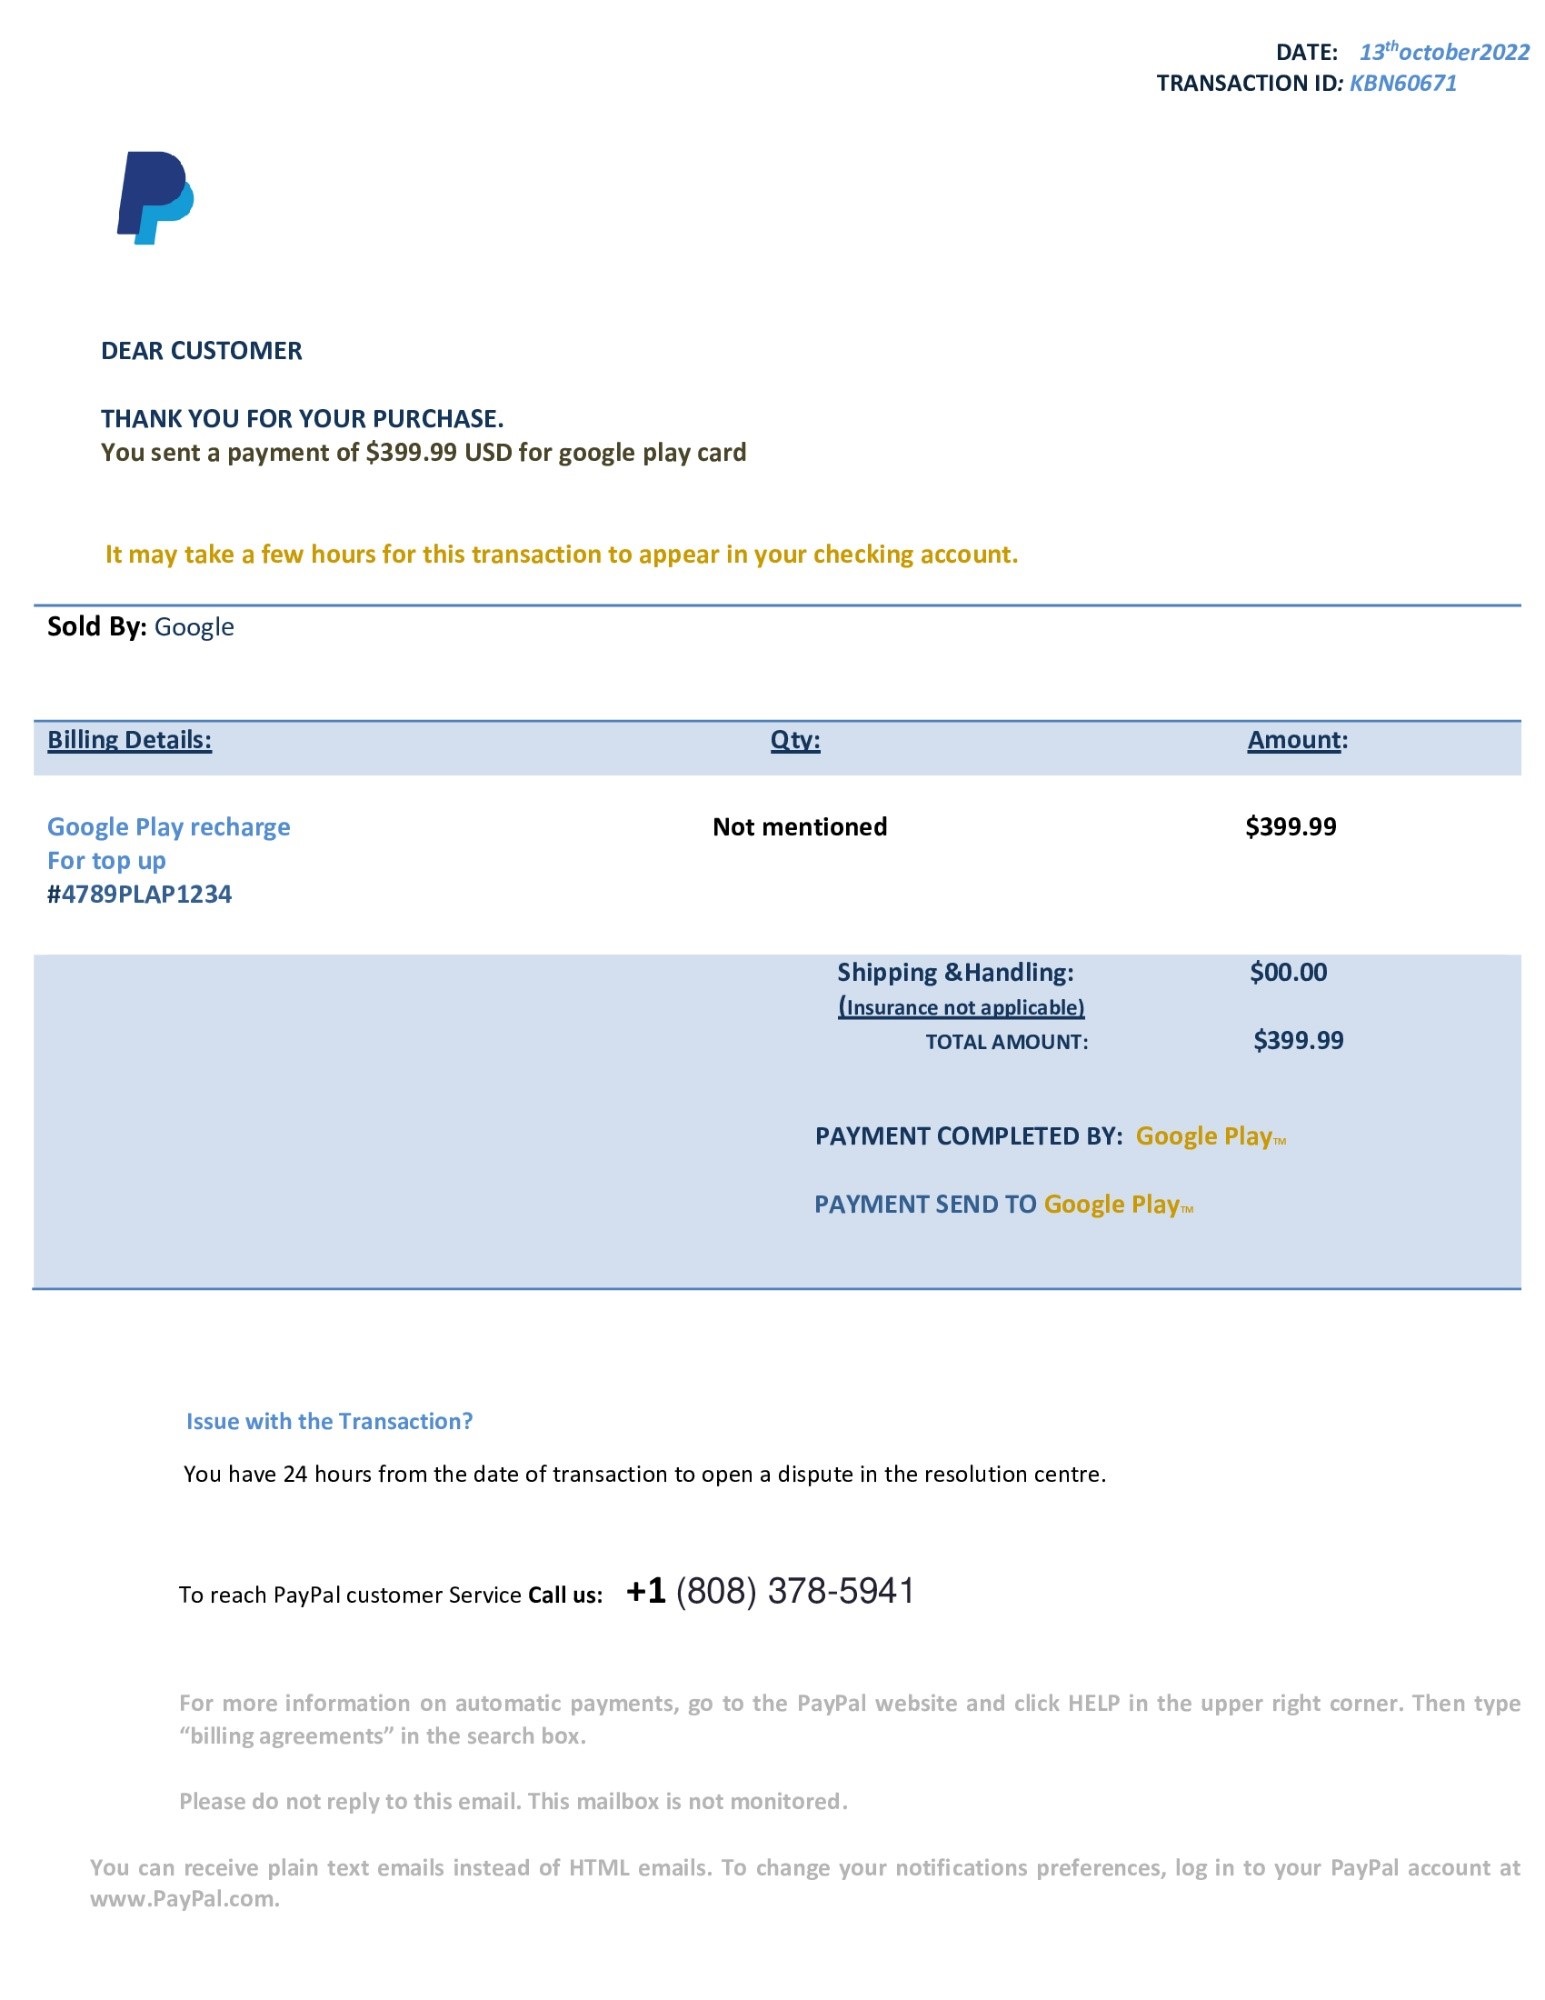 PayPal Customer Service Scam Email Invoice